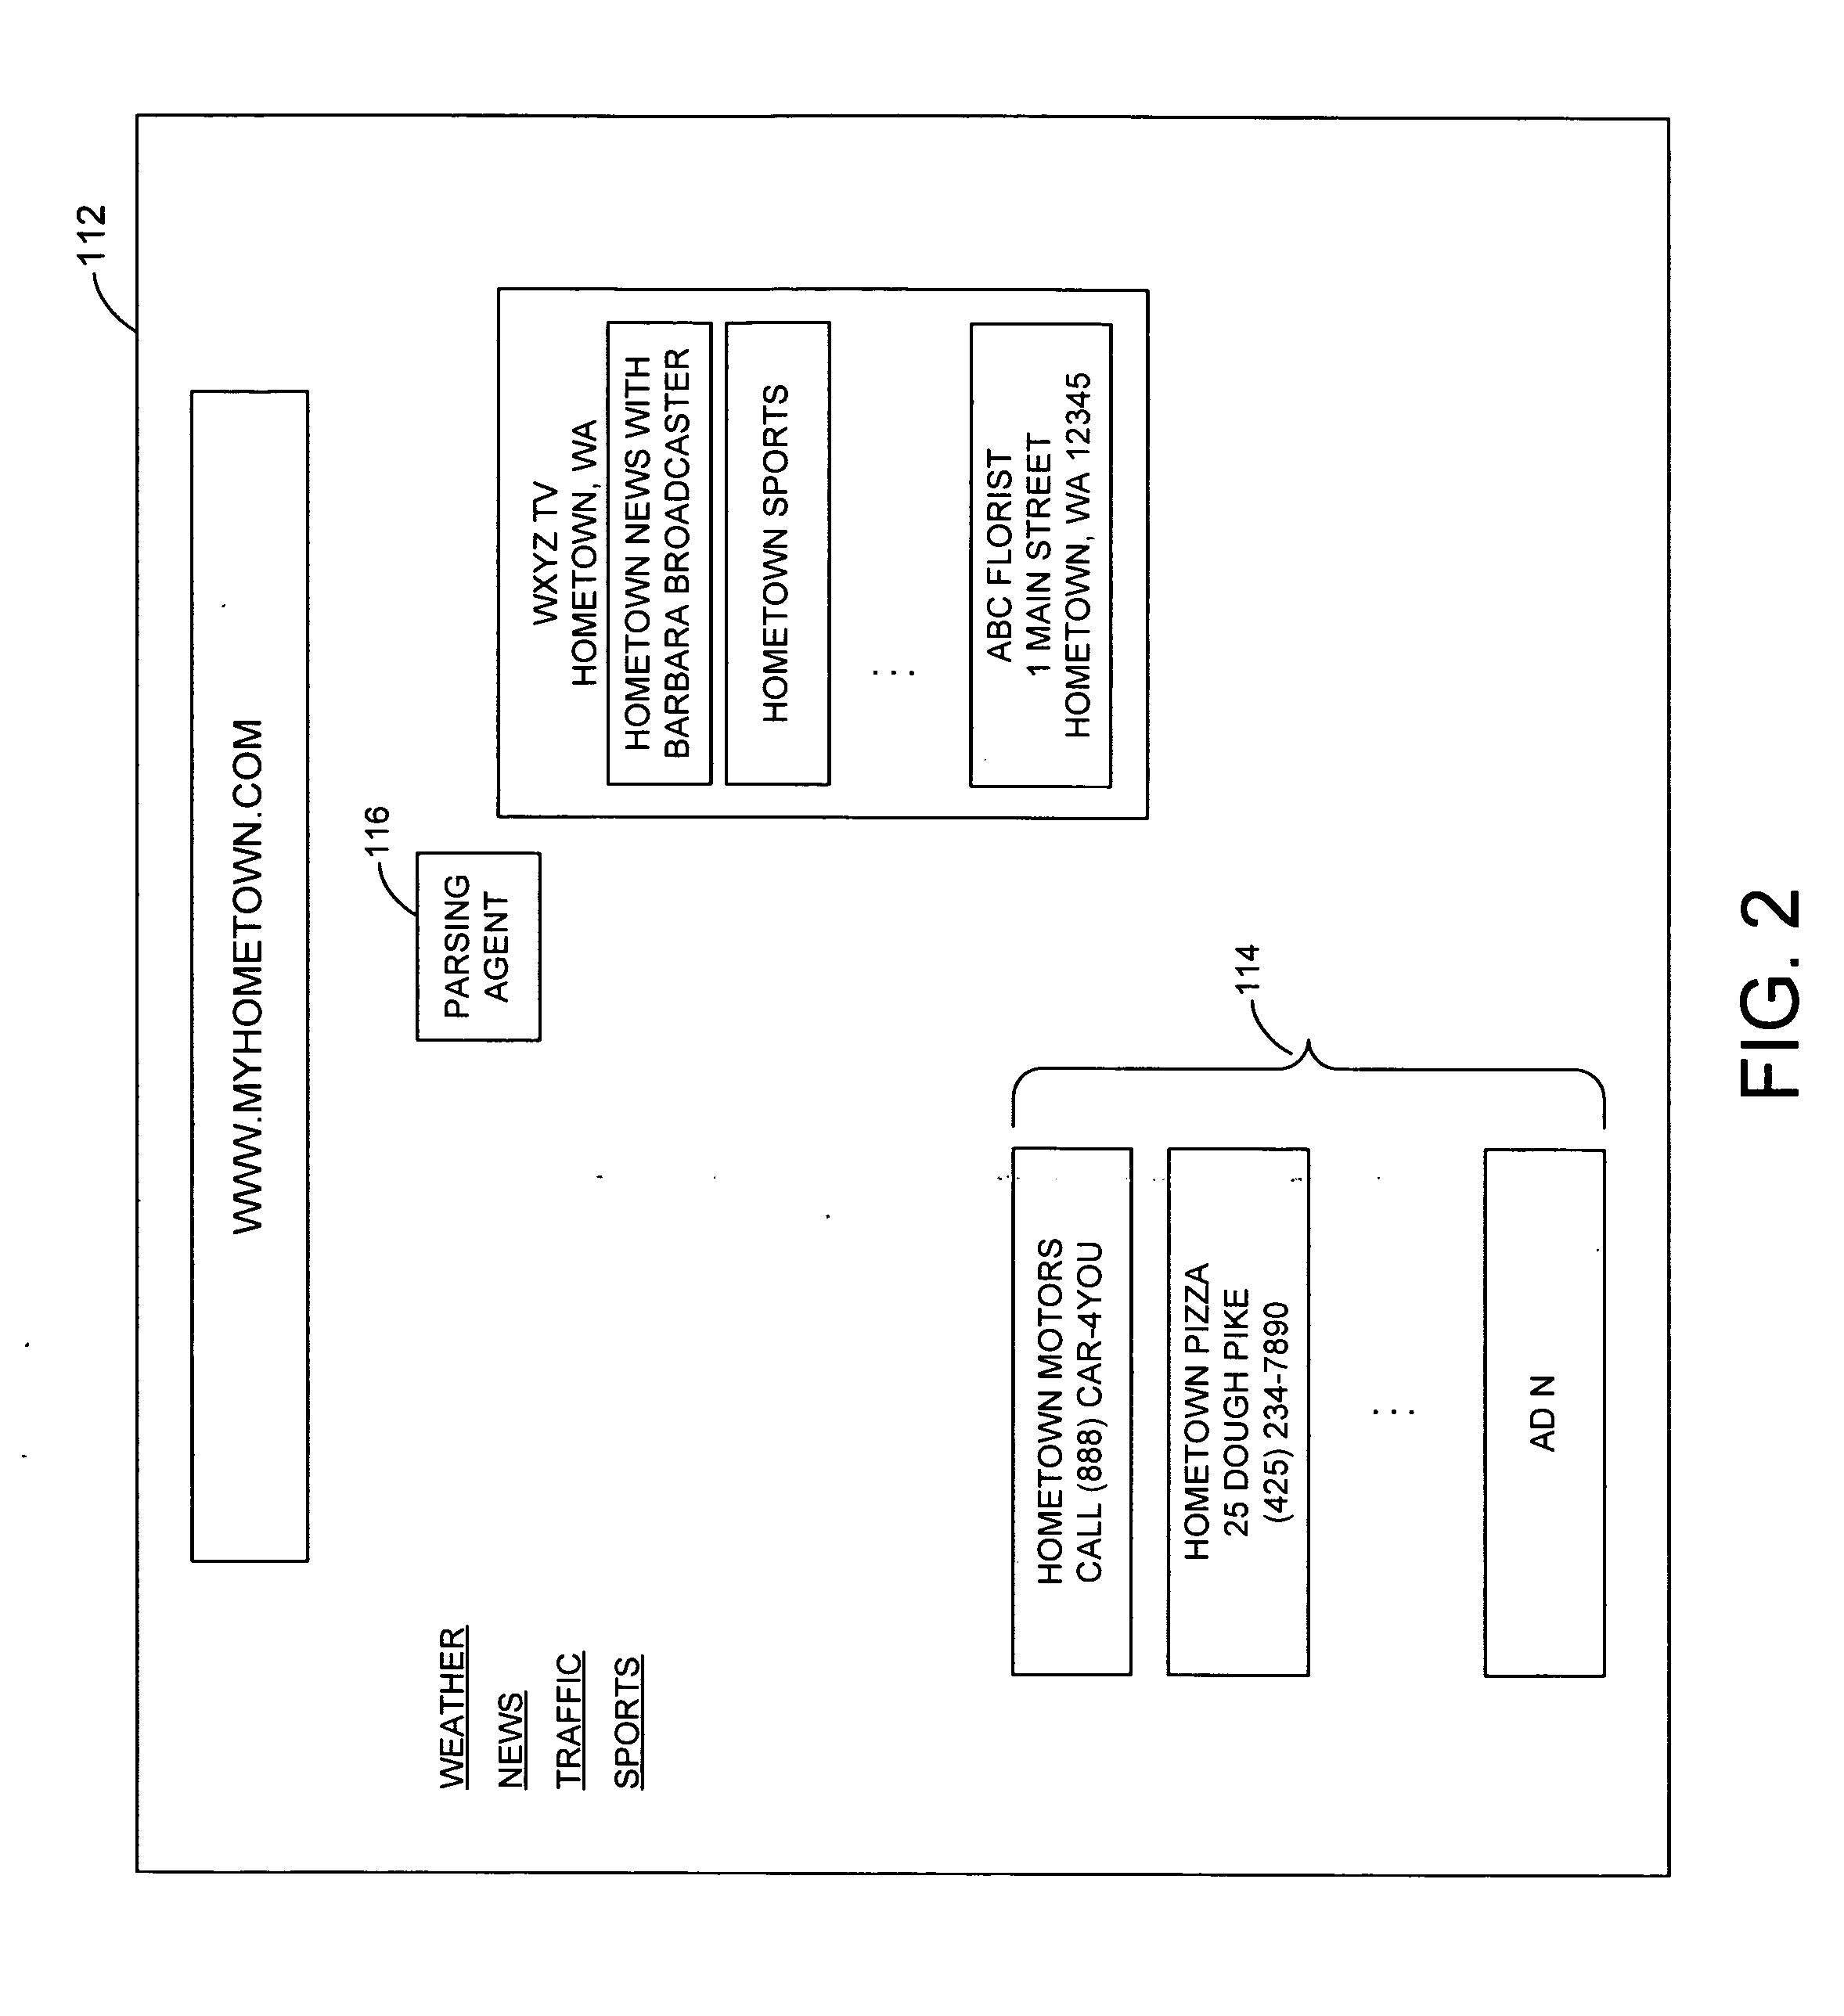 System and method for automatic presentation of locality-based content on network site